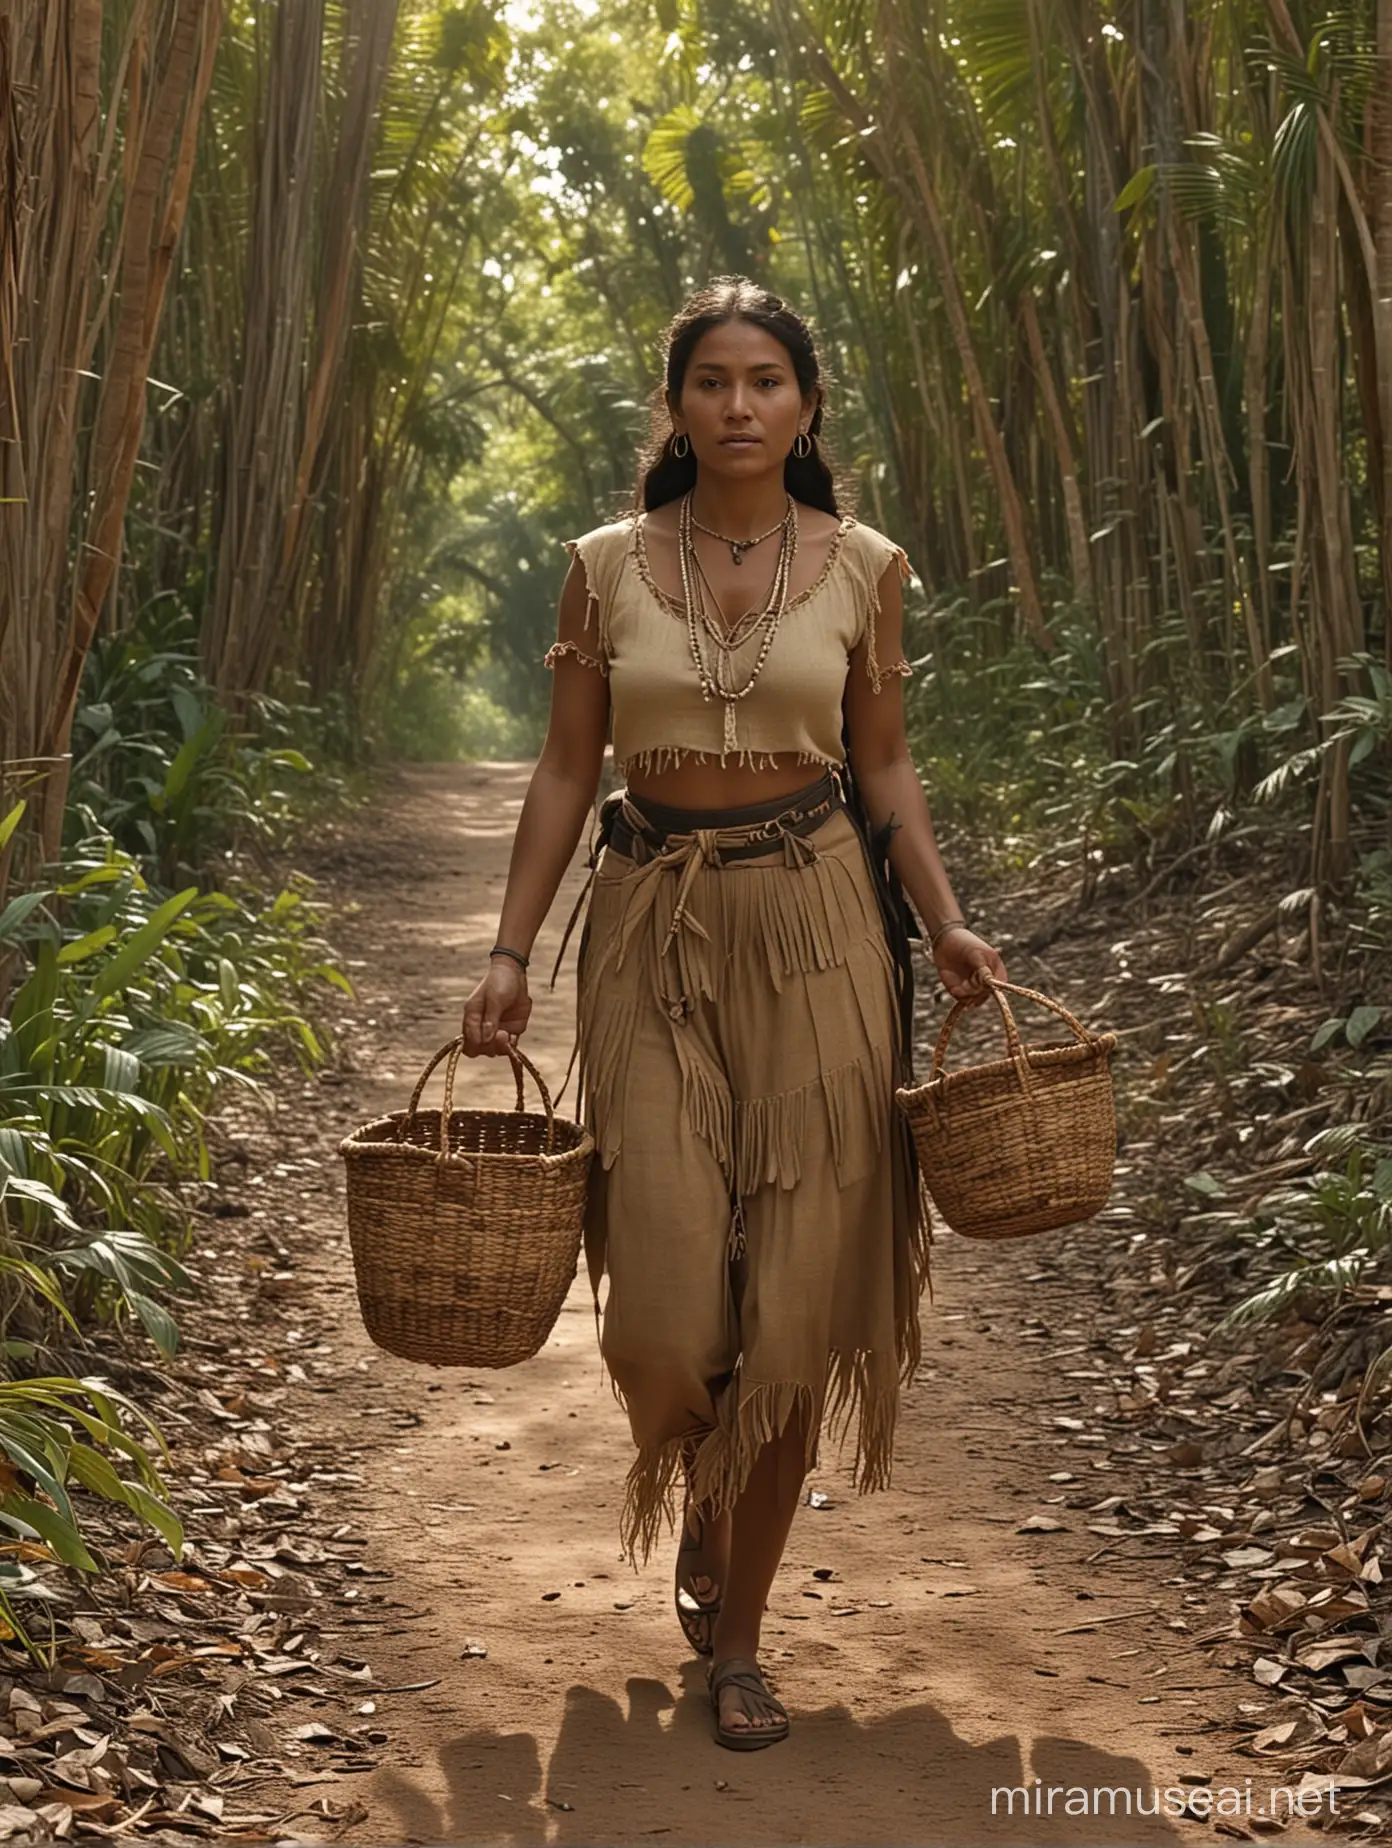 Native Indian Woman Walking in Caribbean Forest with Baskets